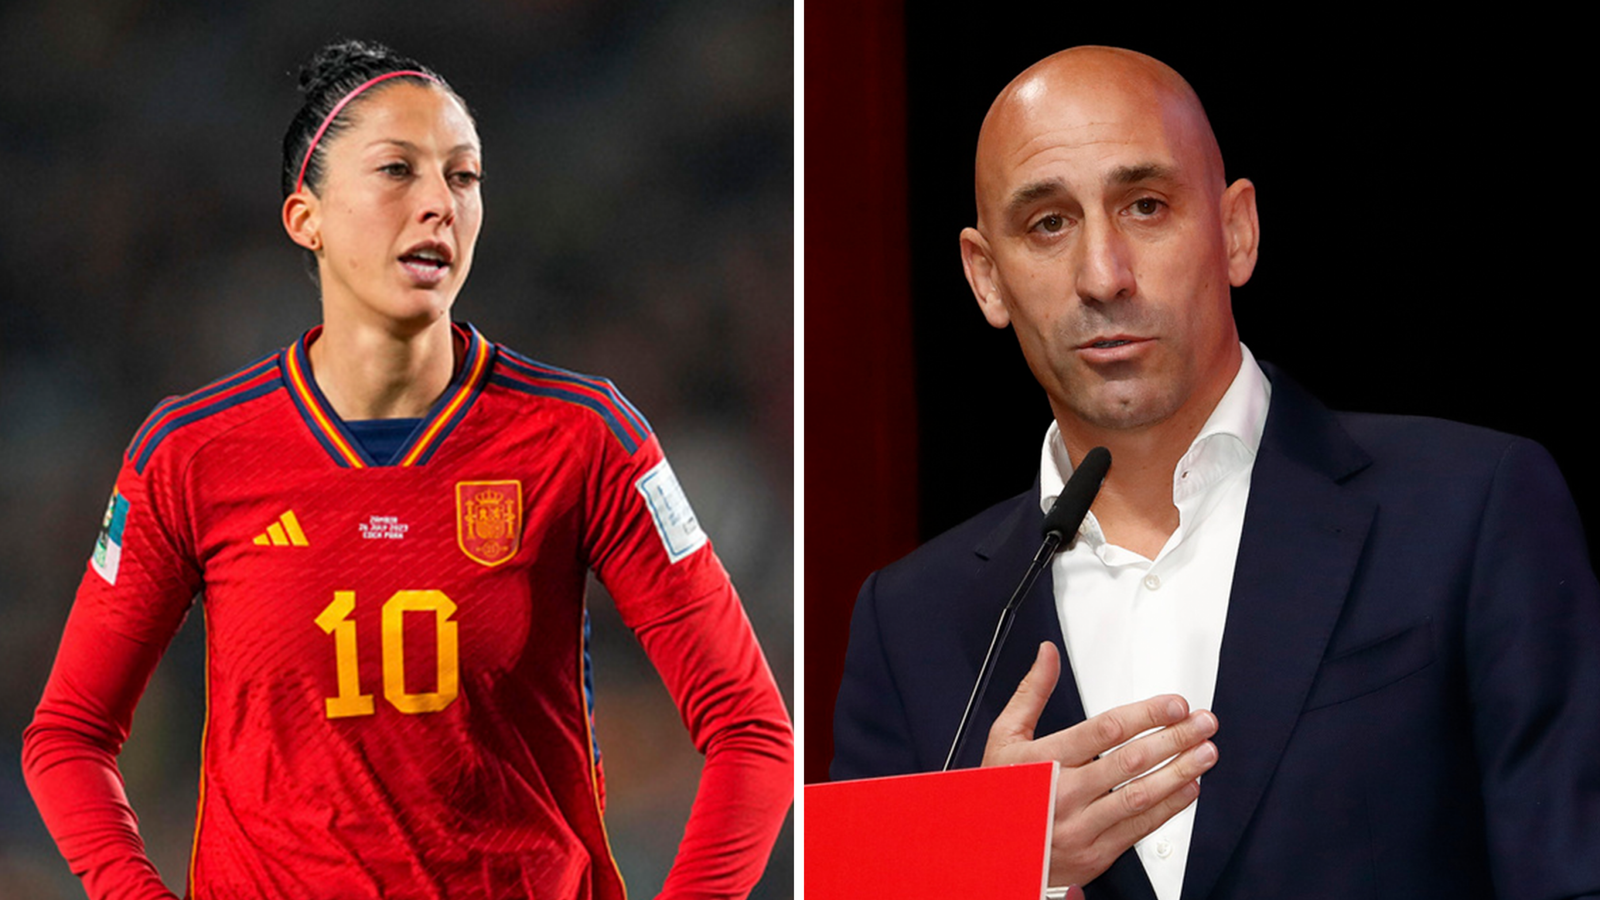 Luis Rubiales and Jenni Hermoso: Who said what in World Cup kiss row